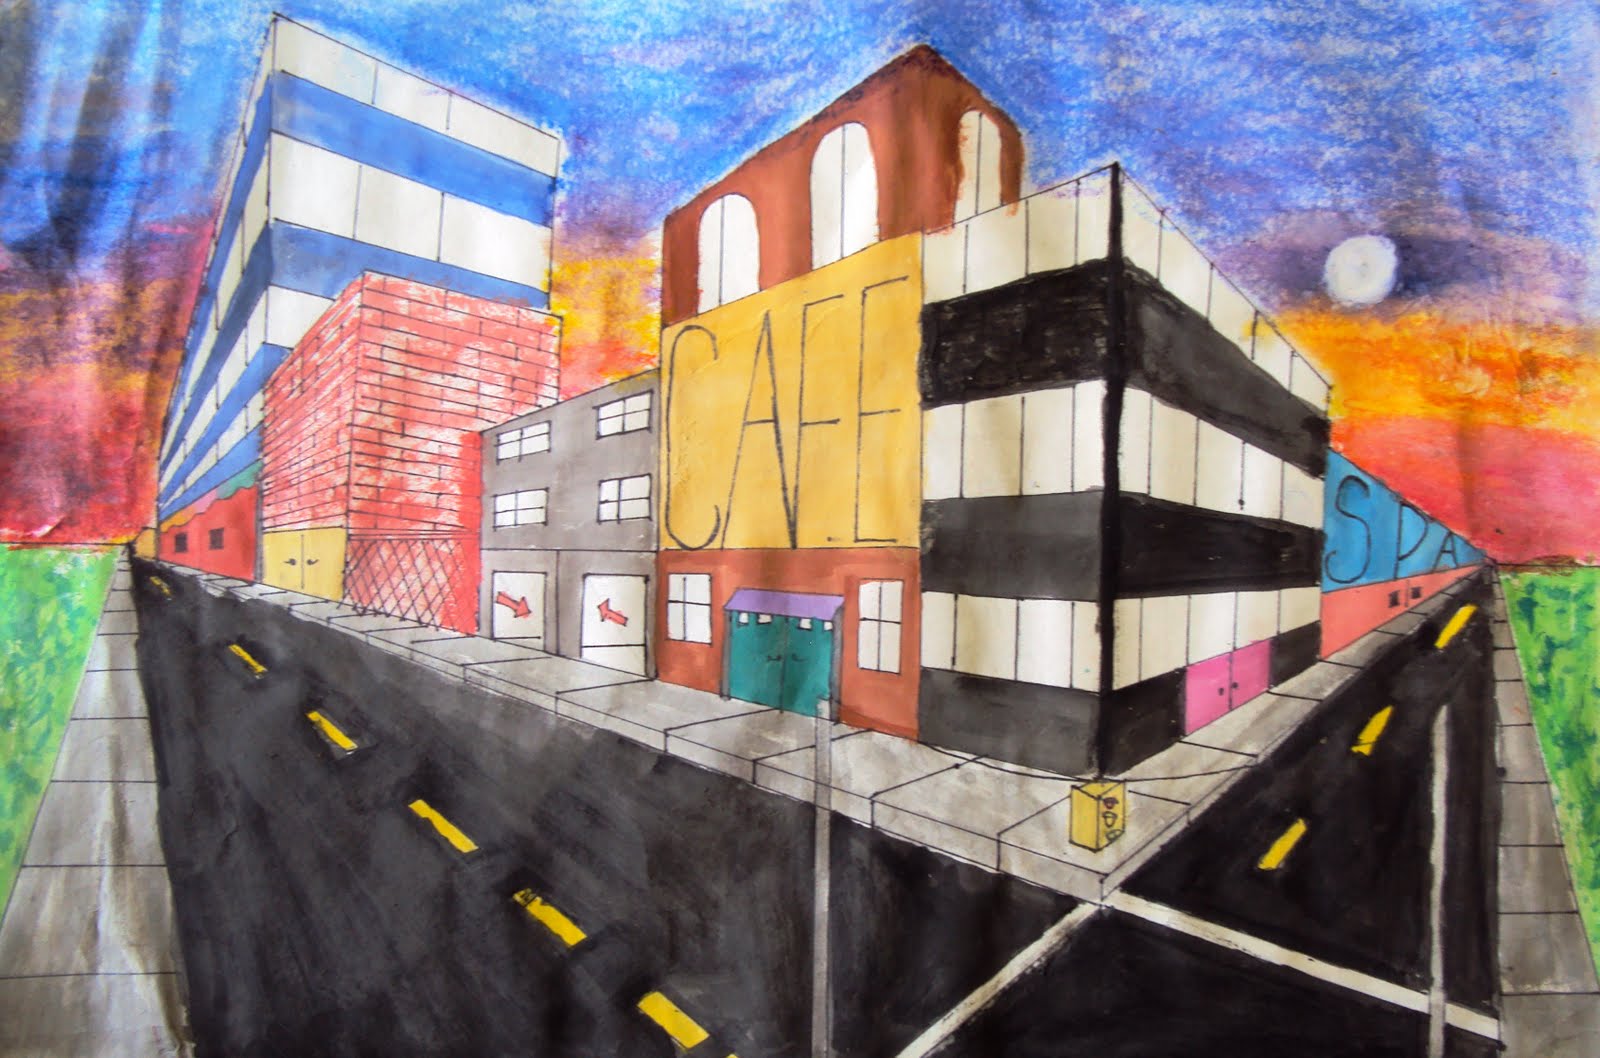 Art 1: Two Point Perspective City